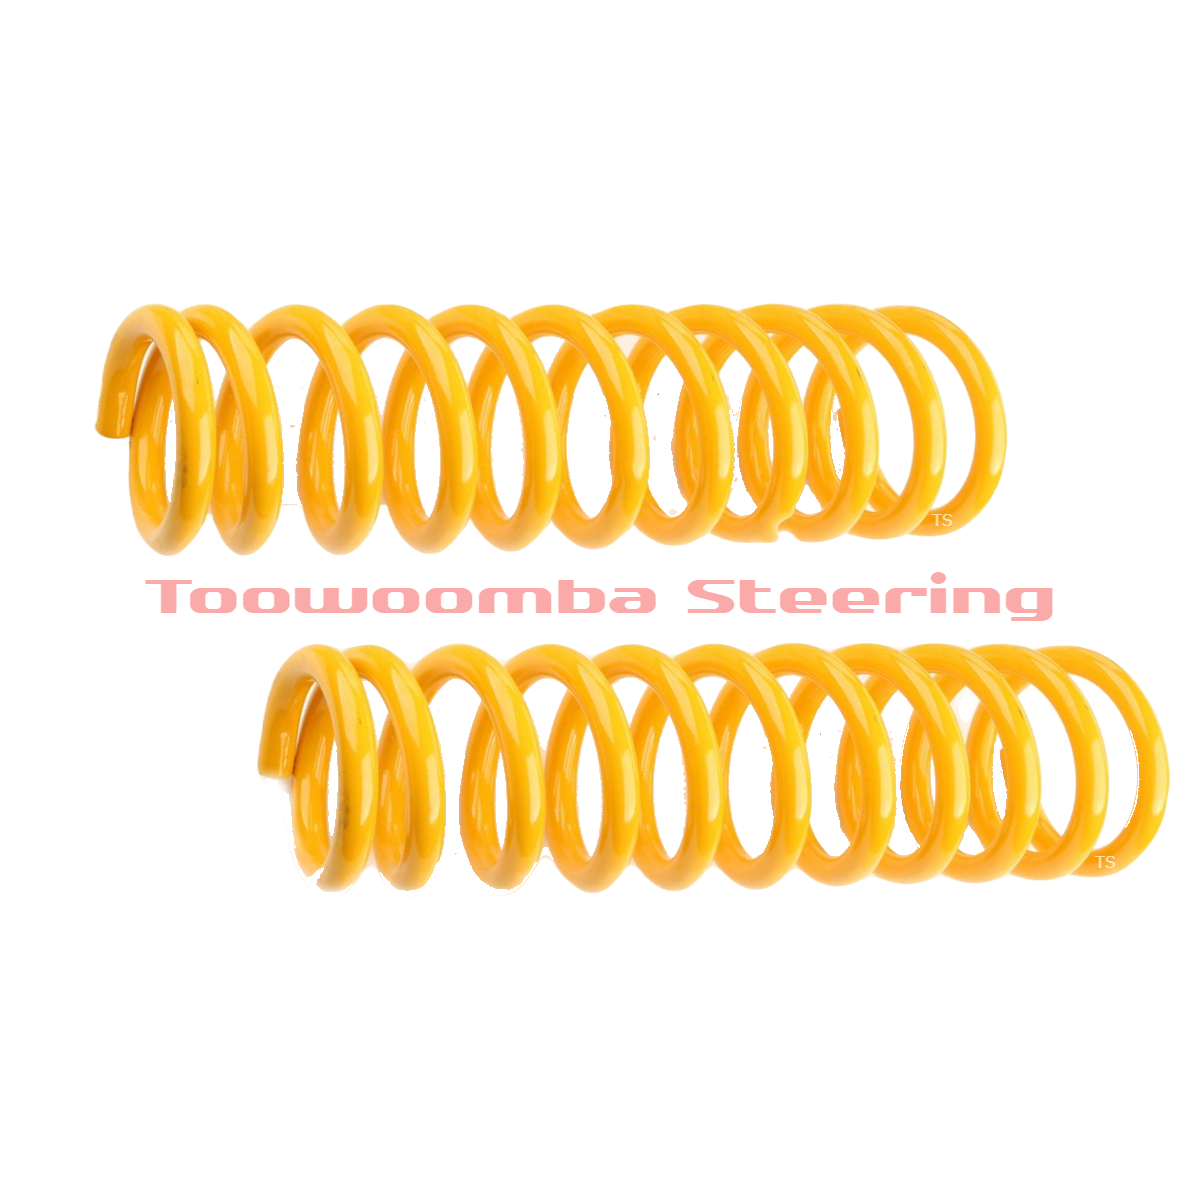 Front Lowered King Springs  -  Ideal for -  Holden Commodore VB; VC; VH; VK 6CYL SEDAN 78-86, Holden Commodore VB; VC; VH; VK; VL; VN; VP 6CYL WAGON 78-86  - (KHFL-22)